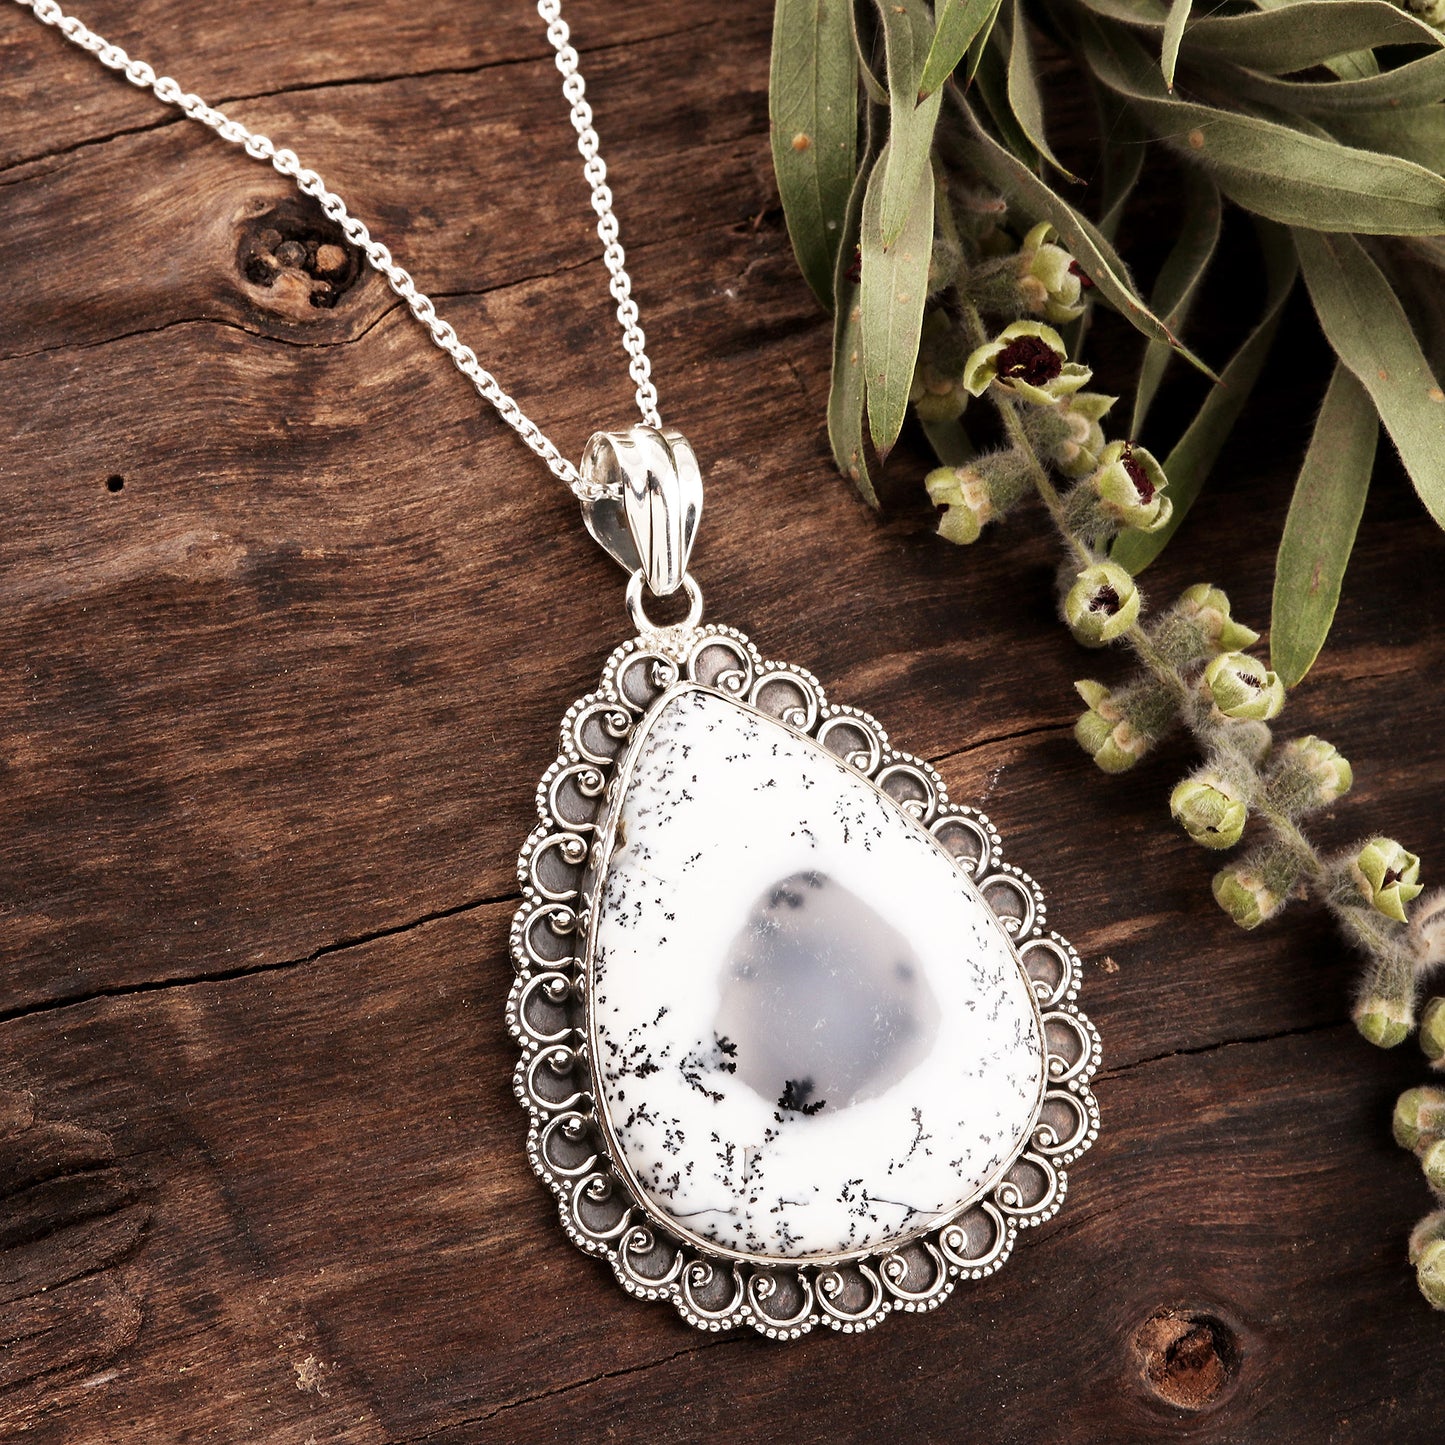 Gathering Storm Dendritic Opal and Sterling Silver Pendant Necklace